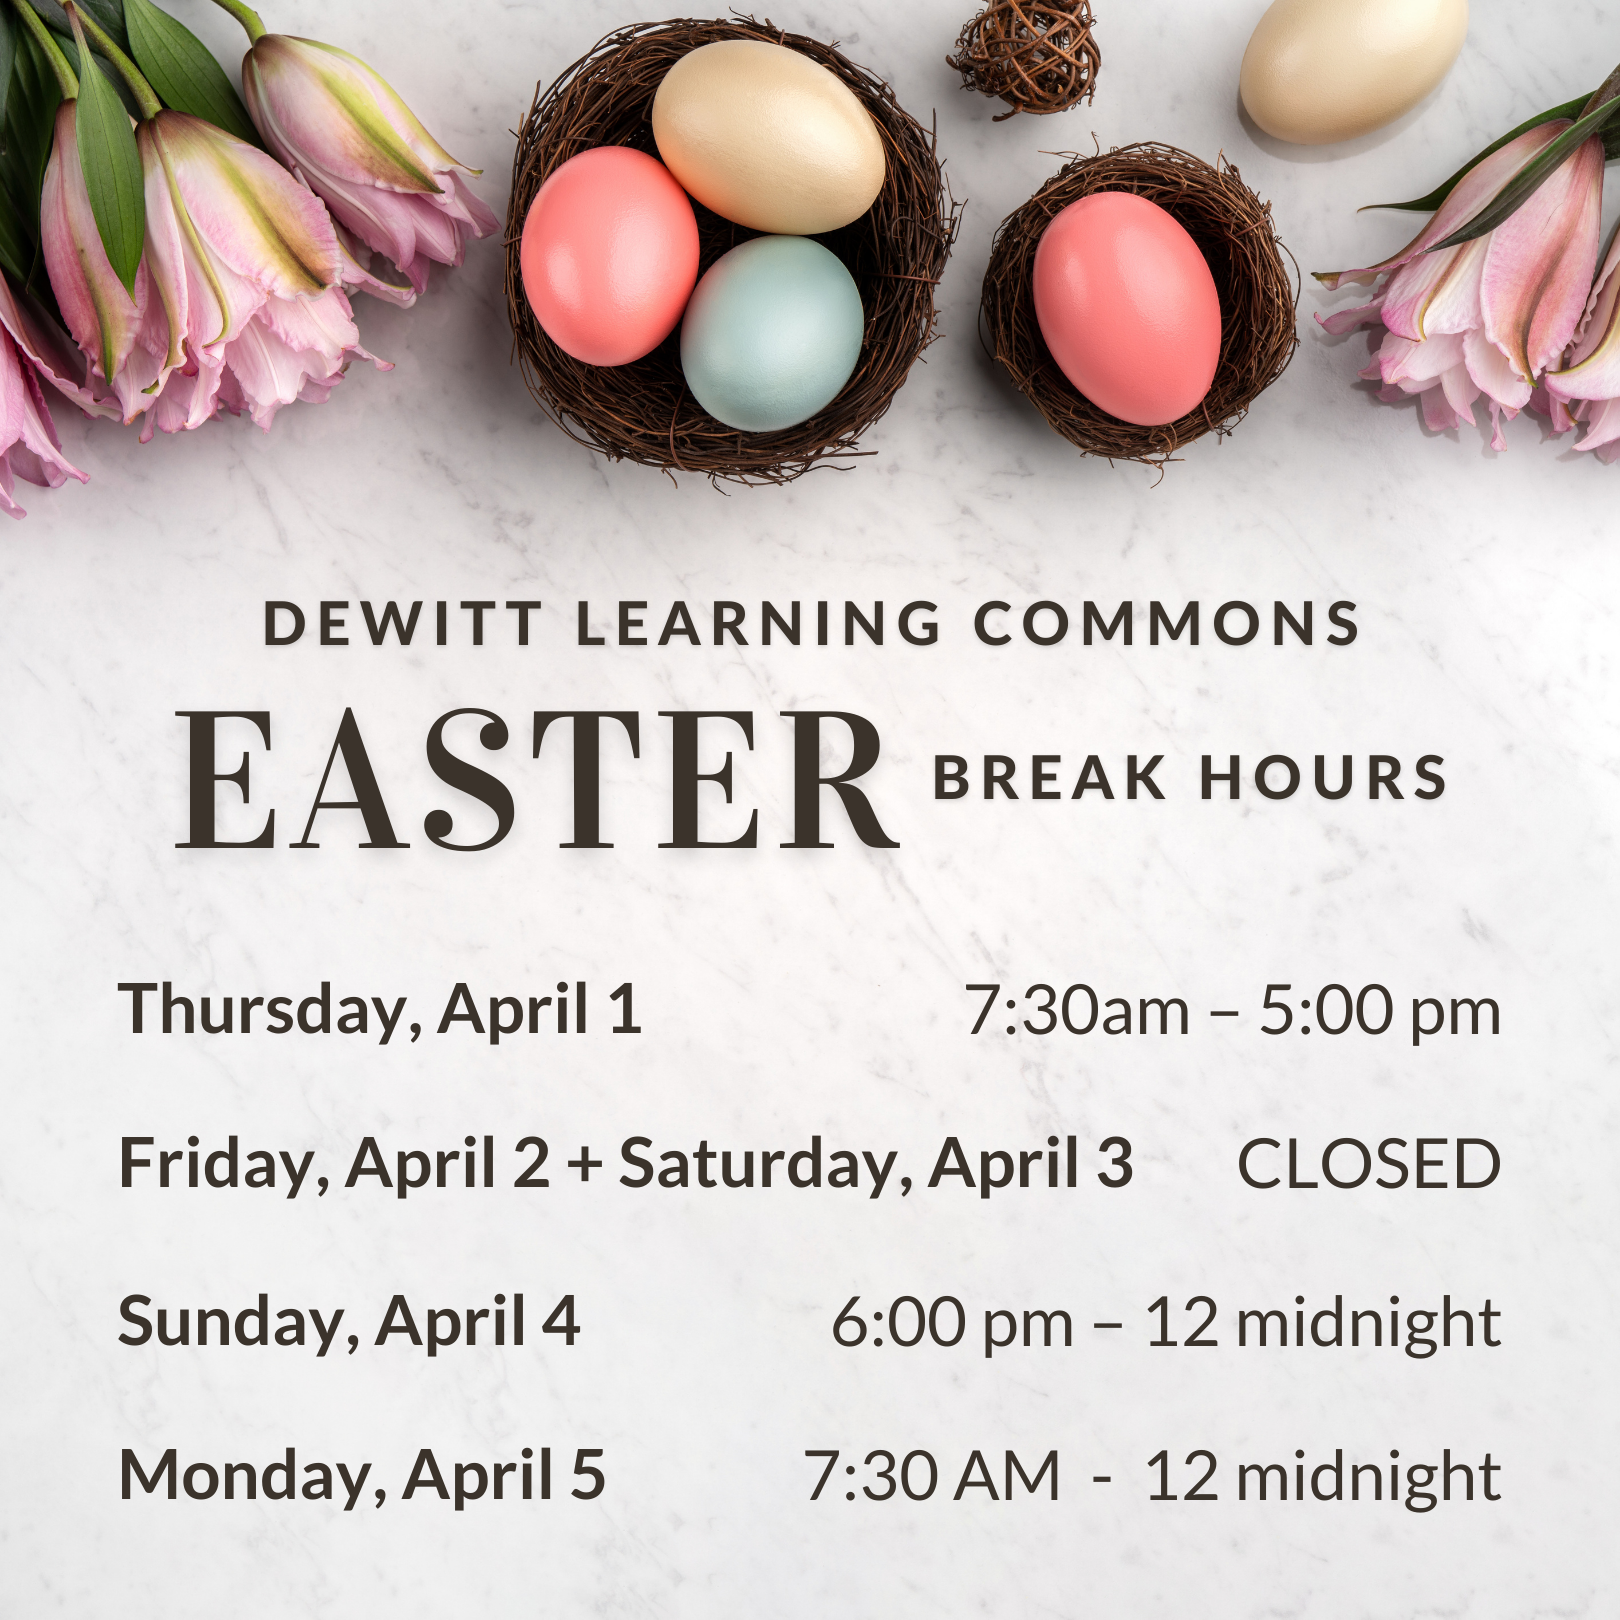 DeWitt Learning Commons Easter Break Hours; Wednesday, March  31: 7:30 am –12 midnight; Thursday, April 1: 7:30 am – 5 pm; Friday, April 2 + Saturday, April 3 : CLOSED; Easter Sunday, April 4: 6 pm – 12 midnight; Monday, April 5: 7:30 am - 12 midnight